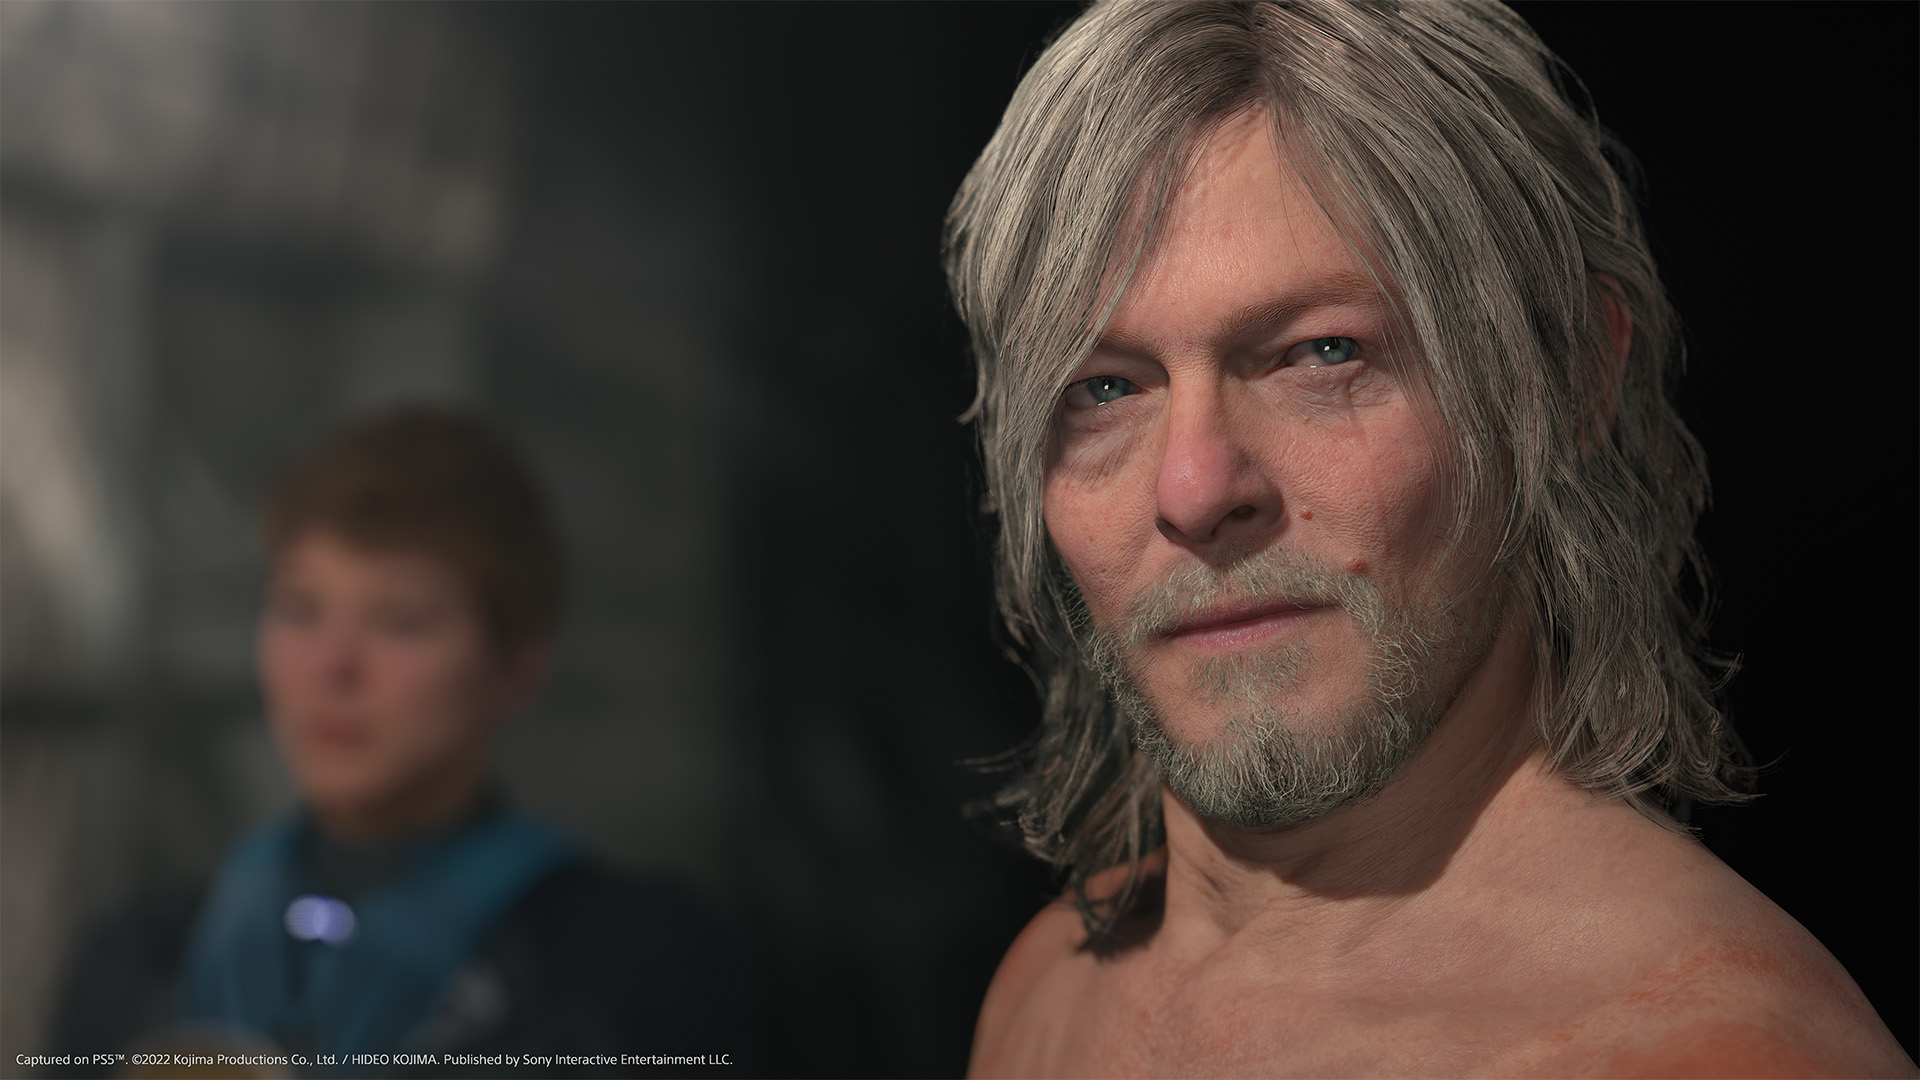 Death Stranding 2: release date speculation, trailers, gameplay